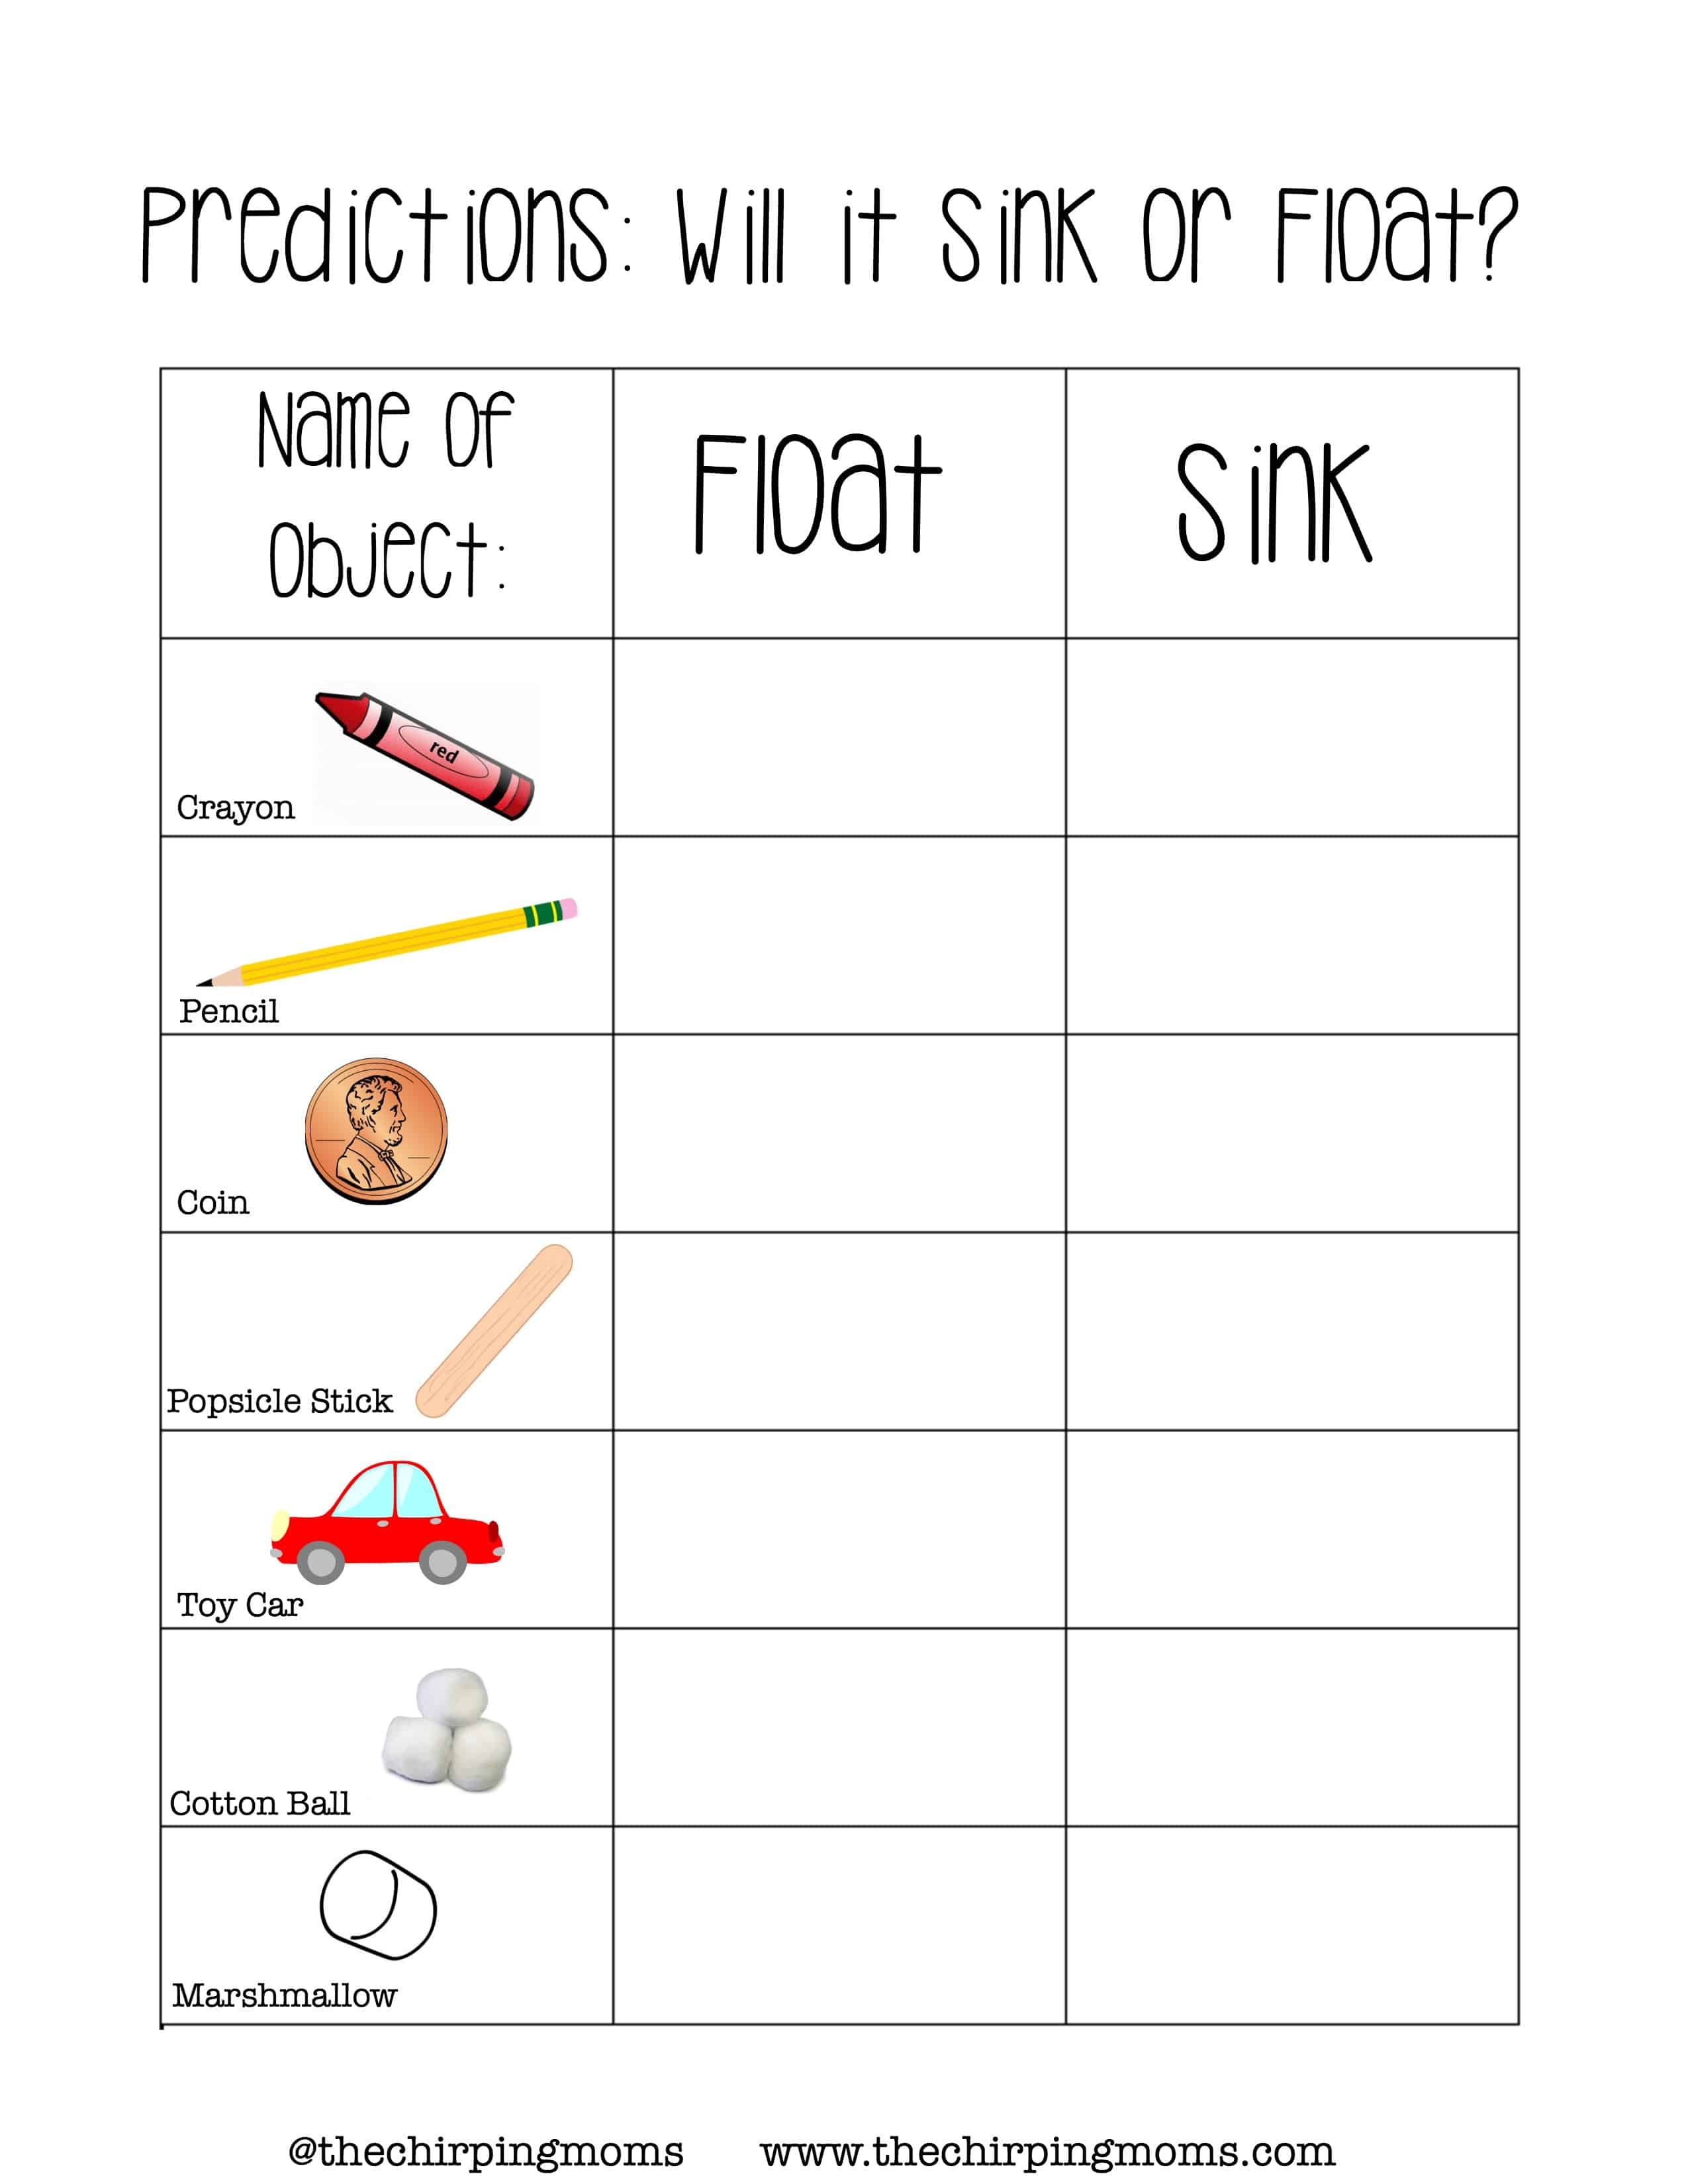 Simple Science: Will it Sink or Float? - The Chirping Moms Intended For Sink Or Float Worksheet